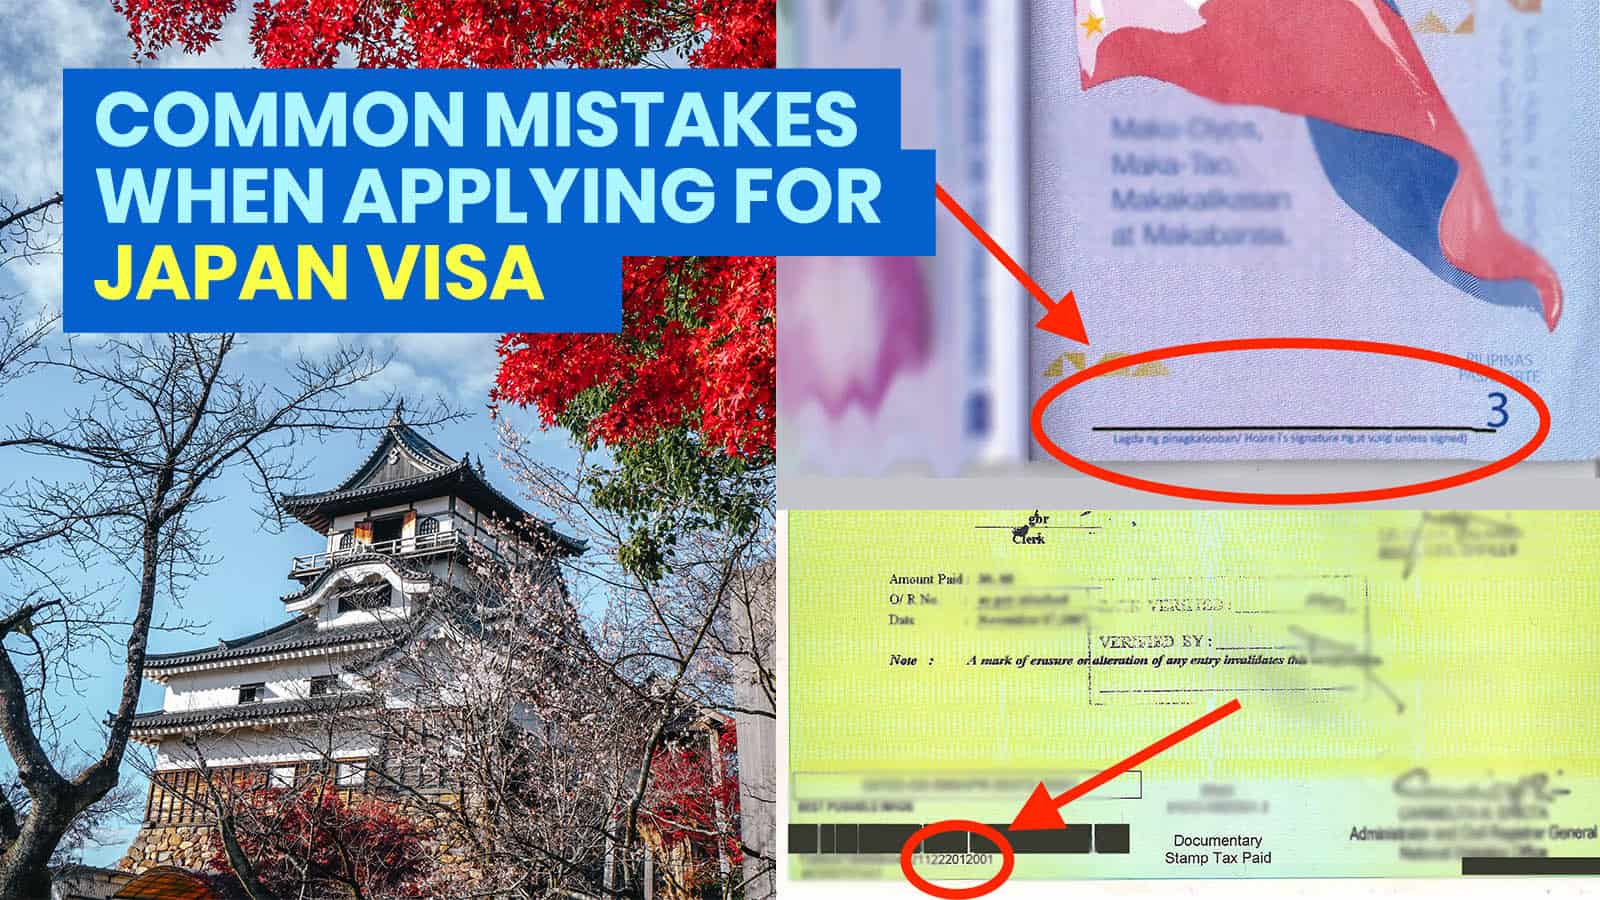 Avoid These 12 COMMON MISTAKES when Applying for a JAPAN VISA!